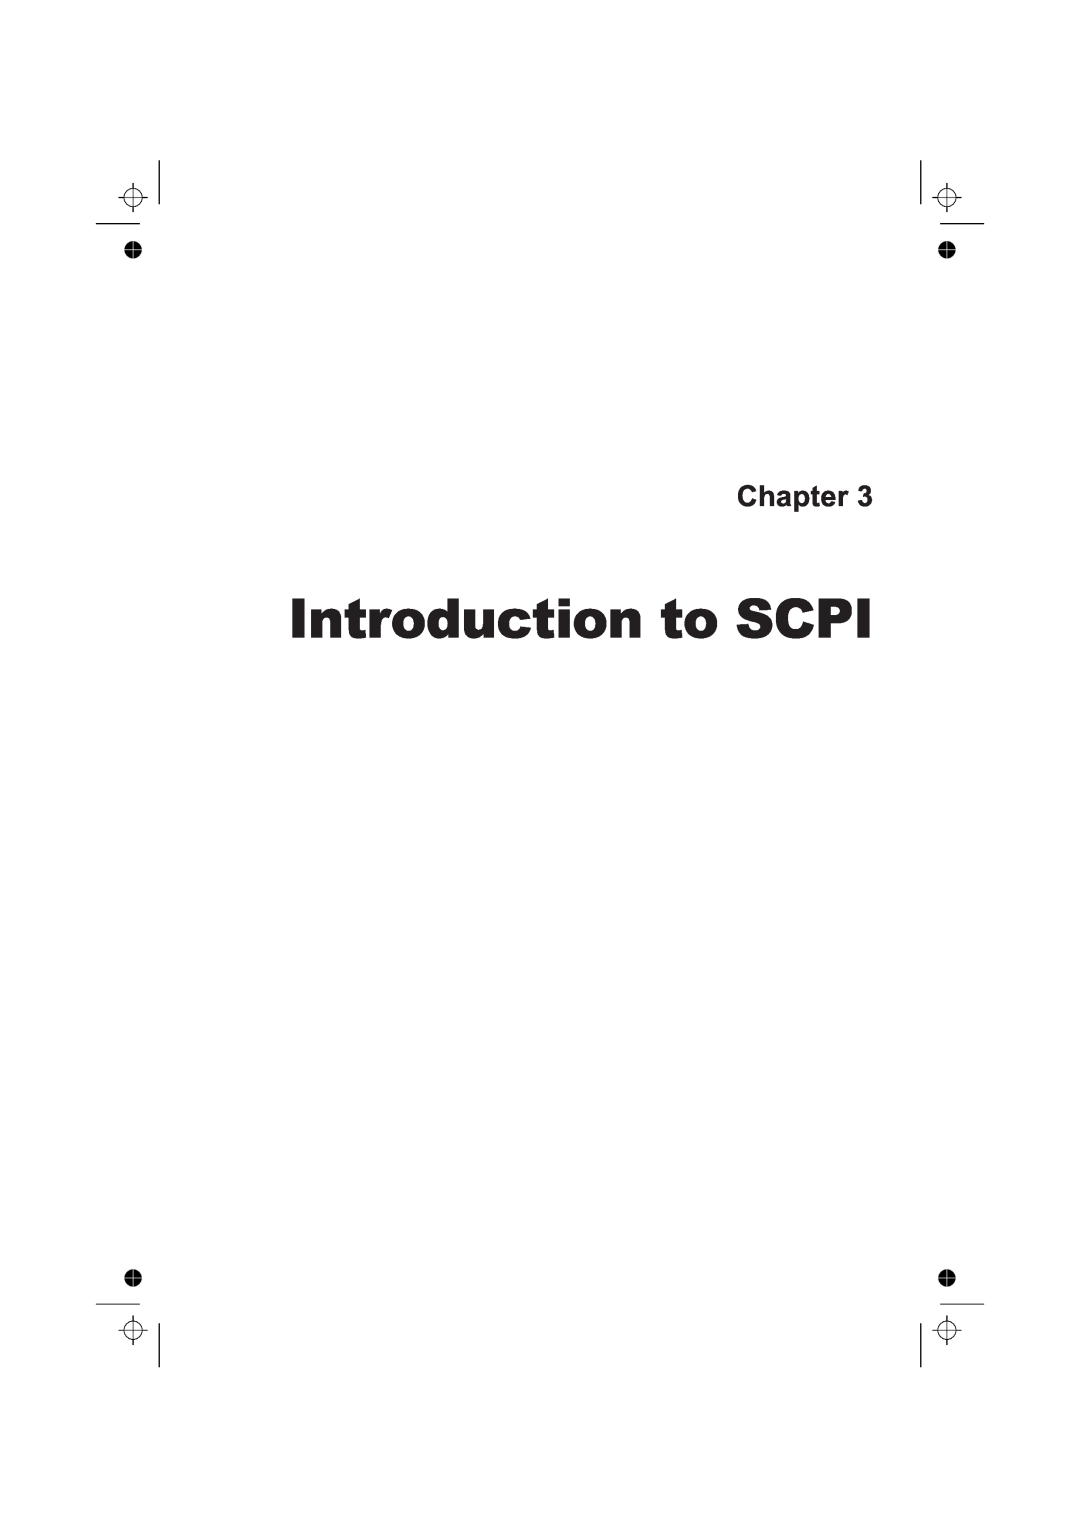 Fluke PM6681R, PM6685R manual Introduction to SCPI, Chapter 